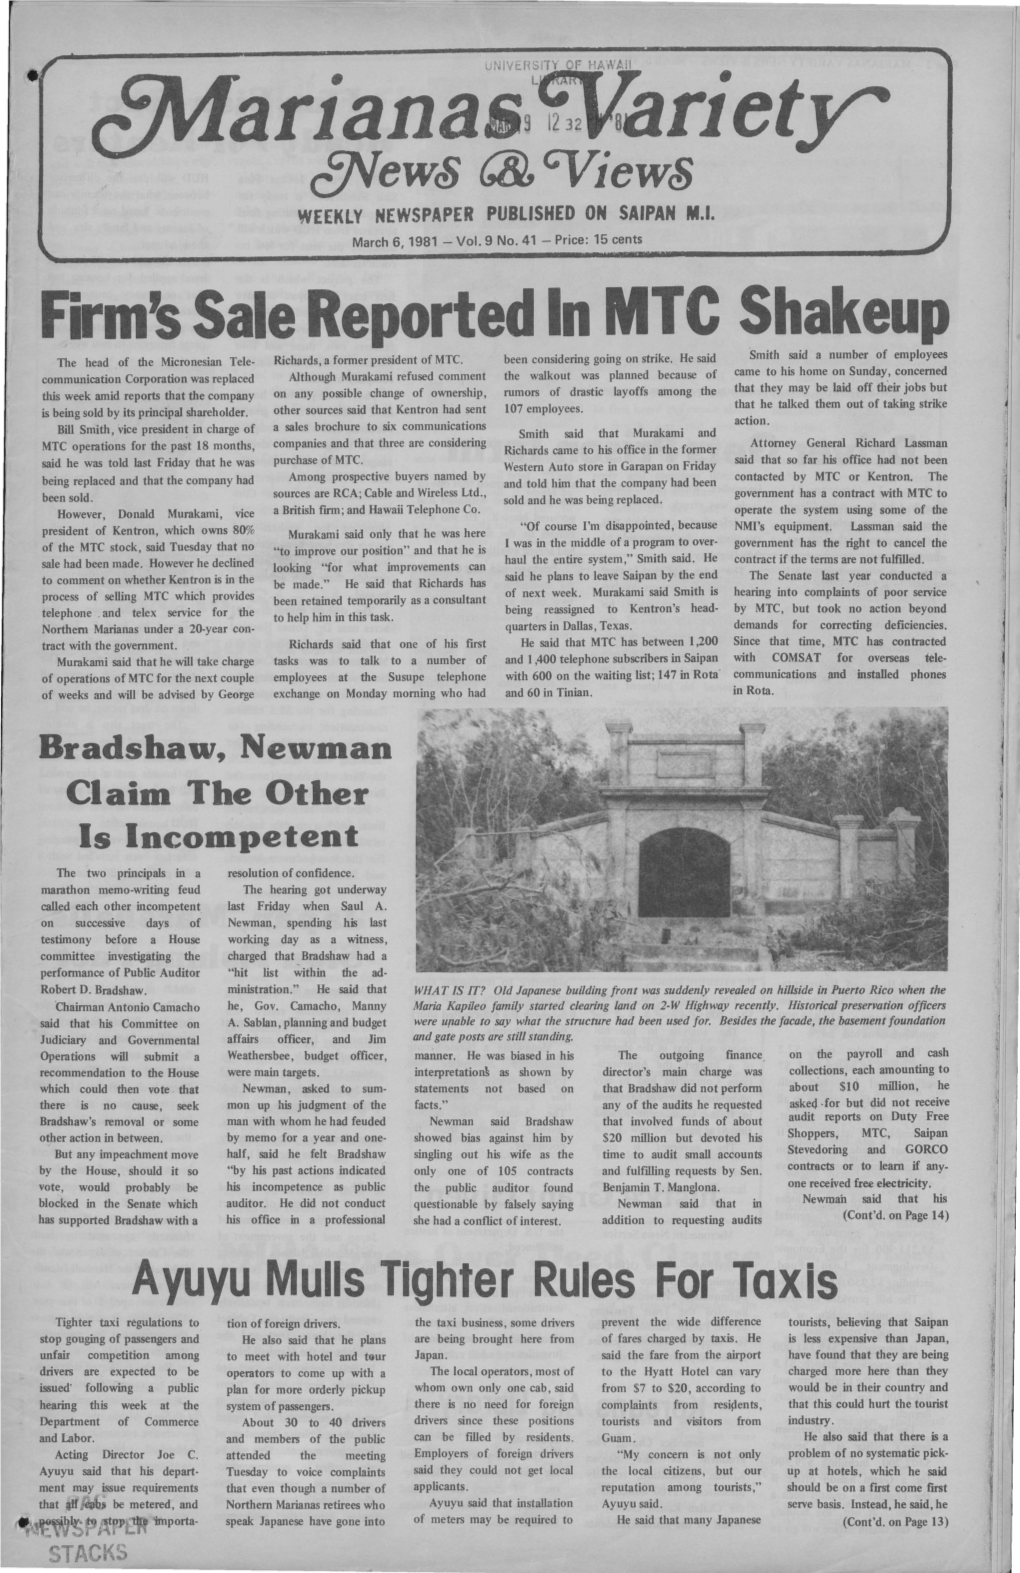 Firm's Sale Reported in MTC Shakeup Smith Said a Number of Employees the Head of the Micronesian Tele- Richards, a Former President of MTC